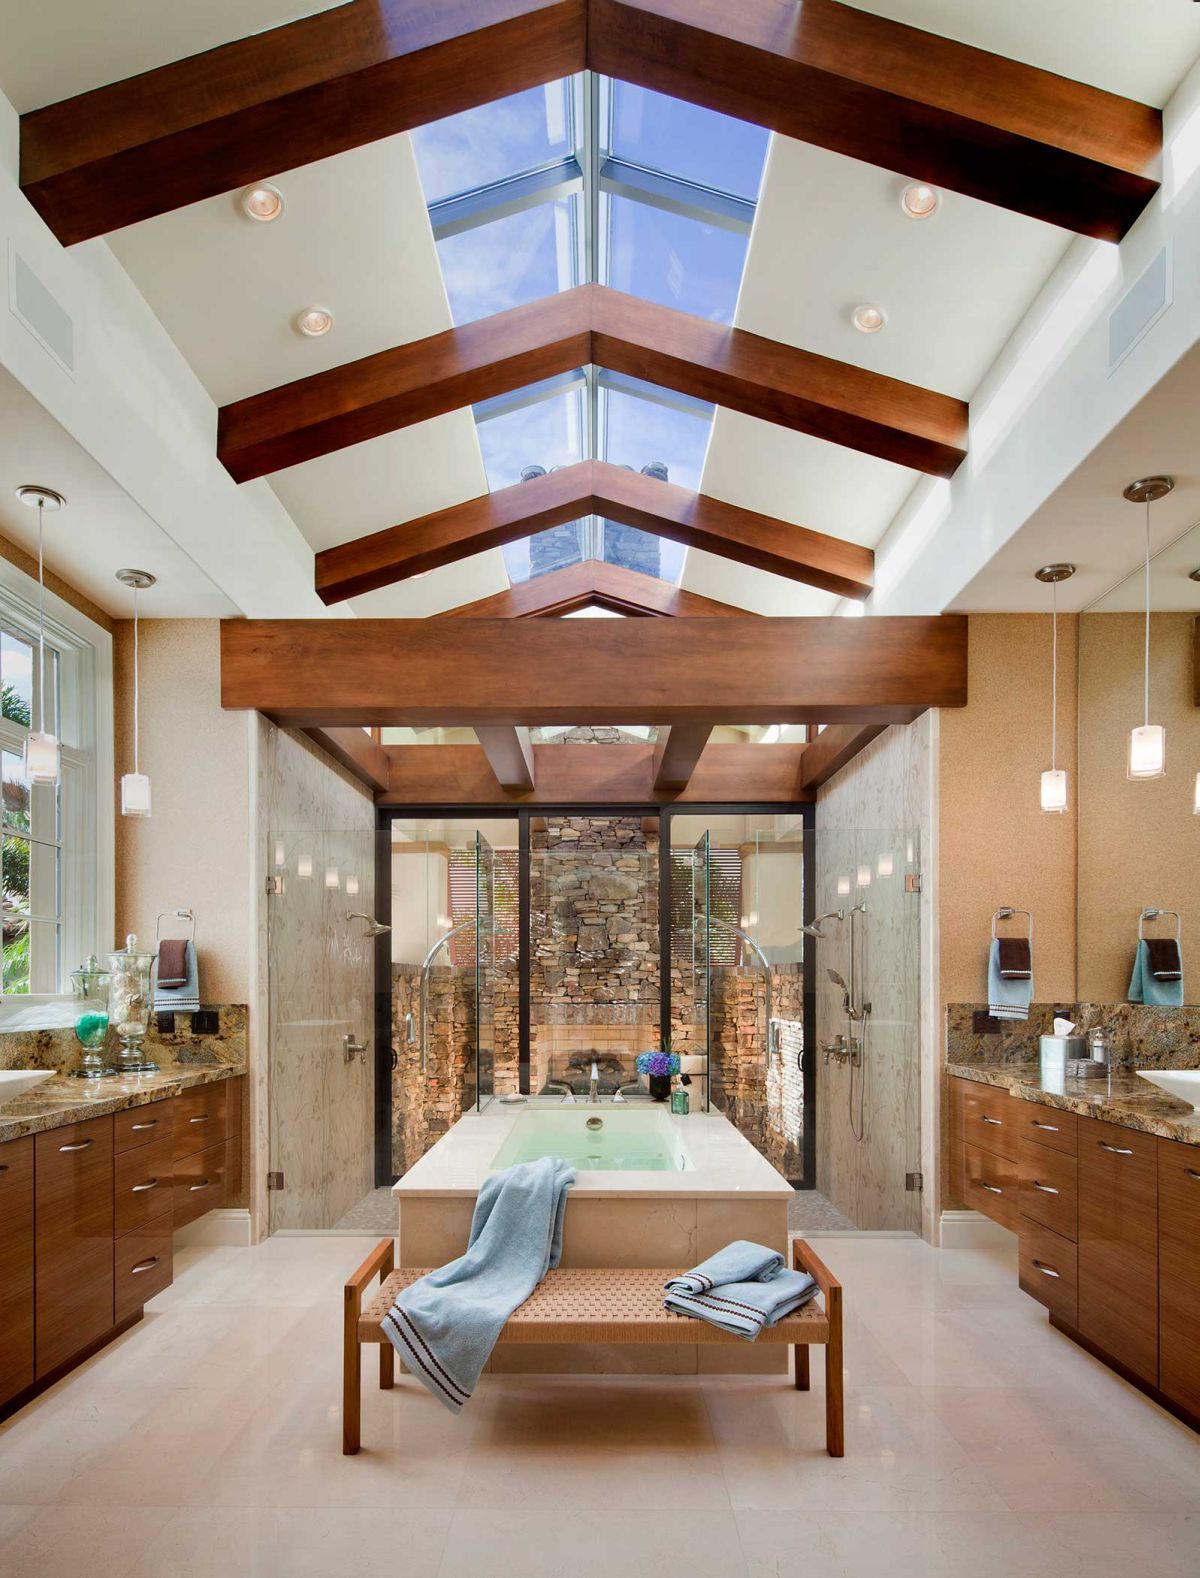 Master bathroom with vaulted ceiling and skylight